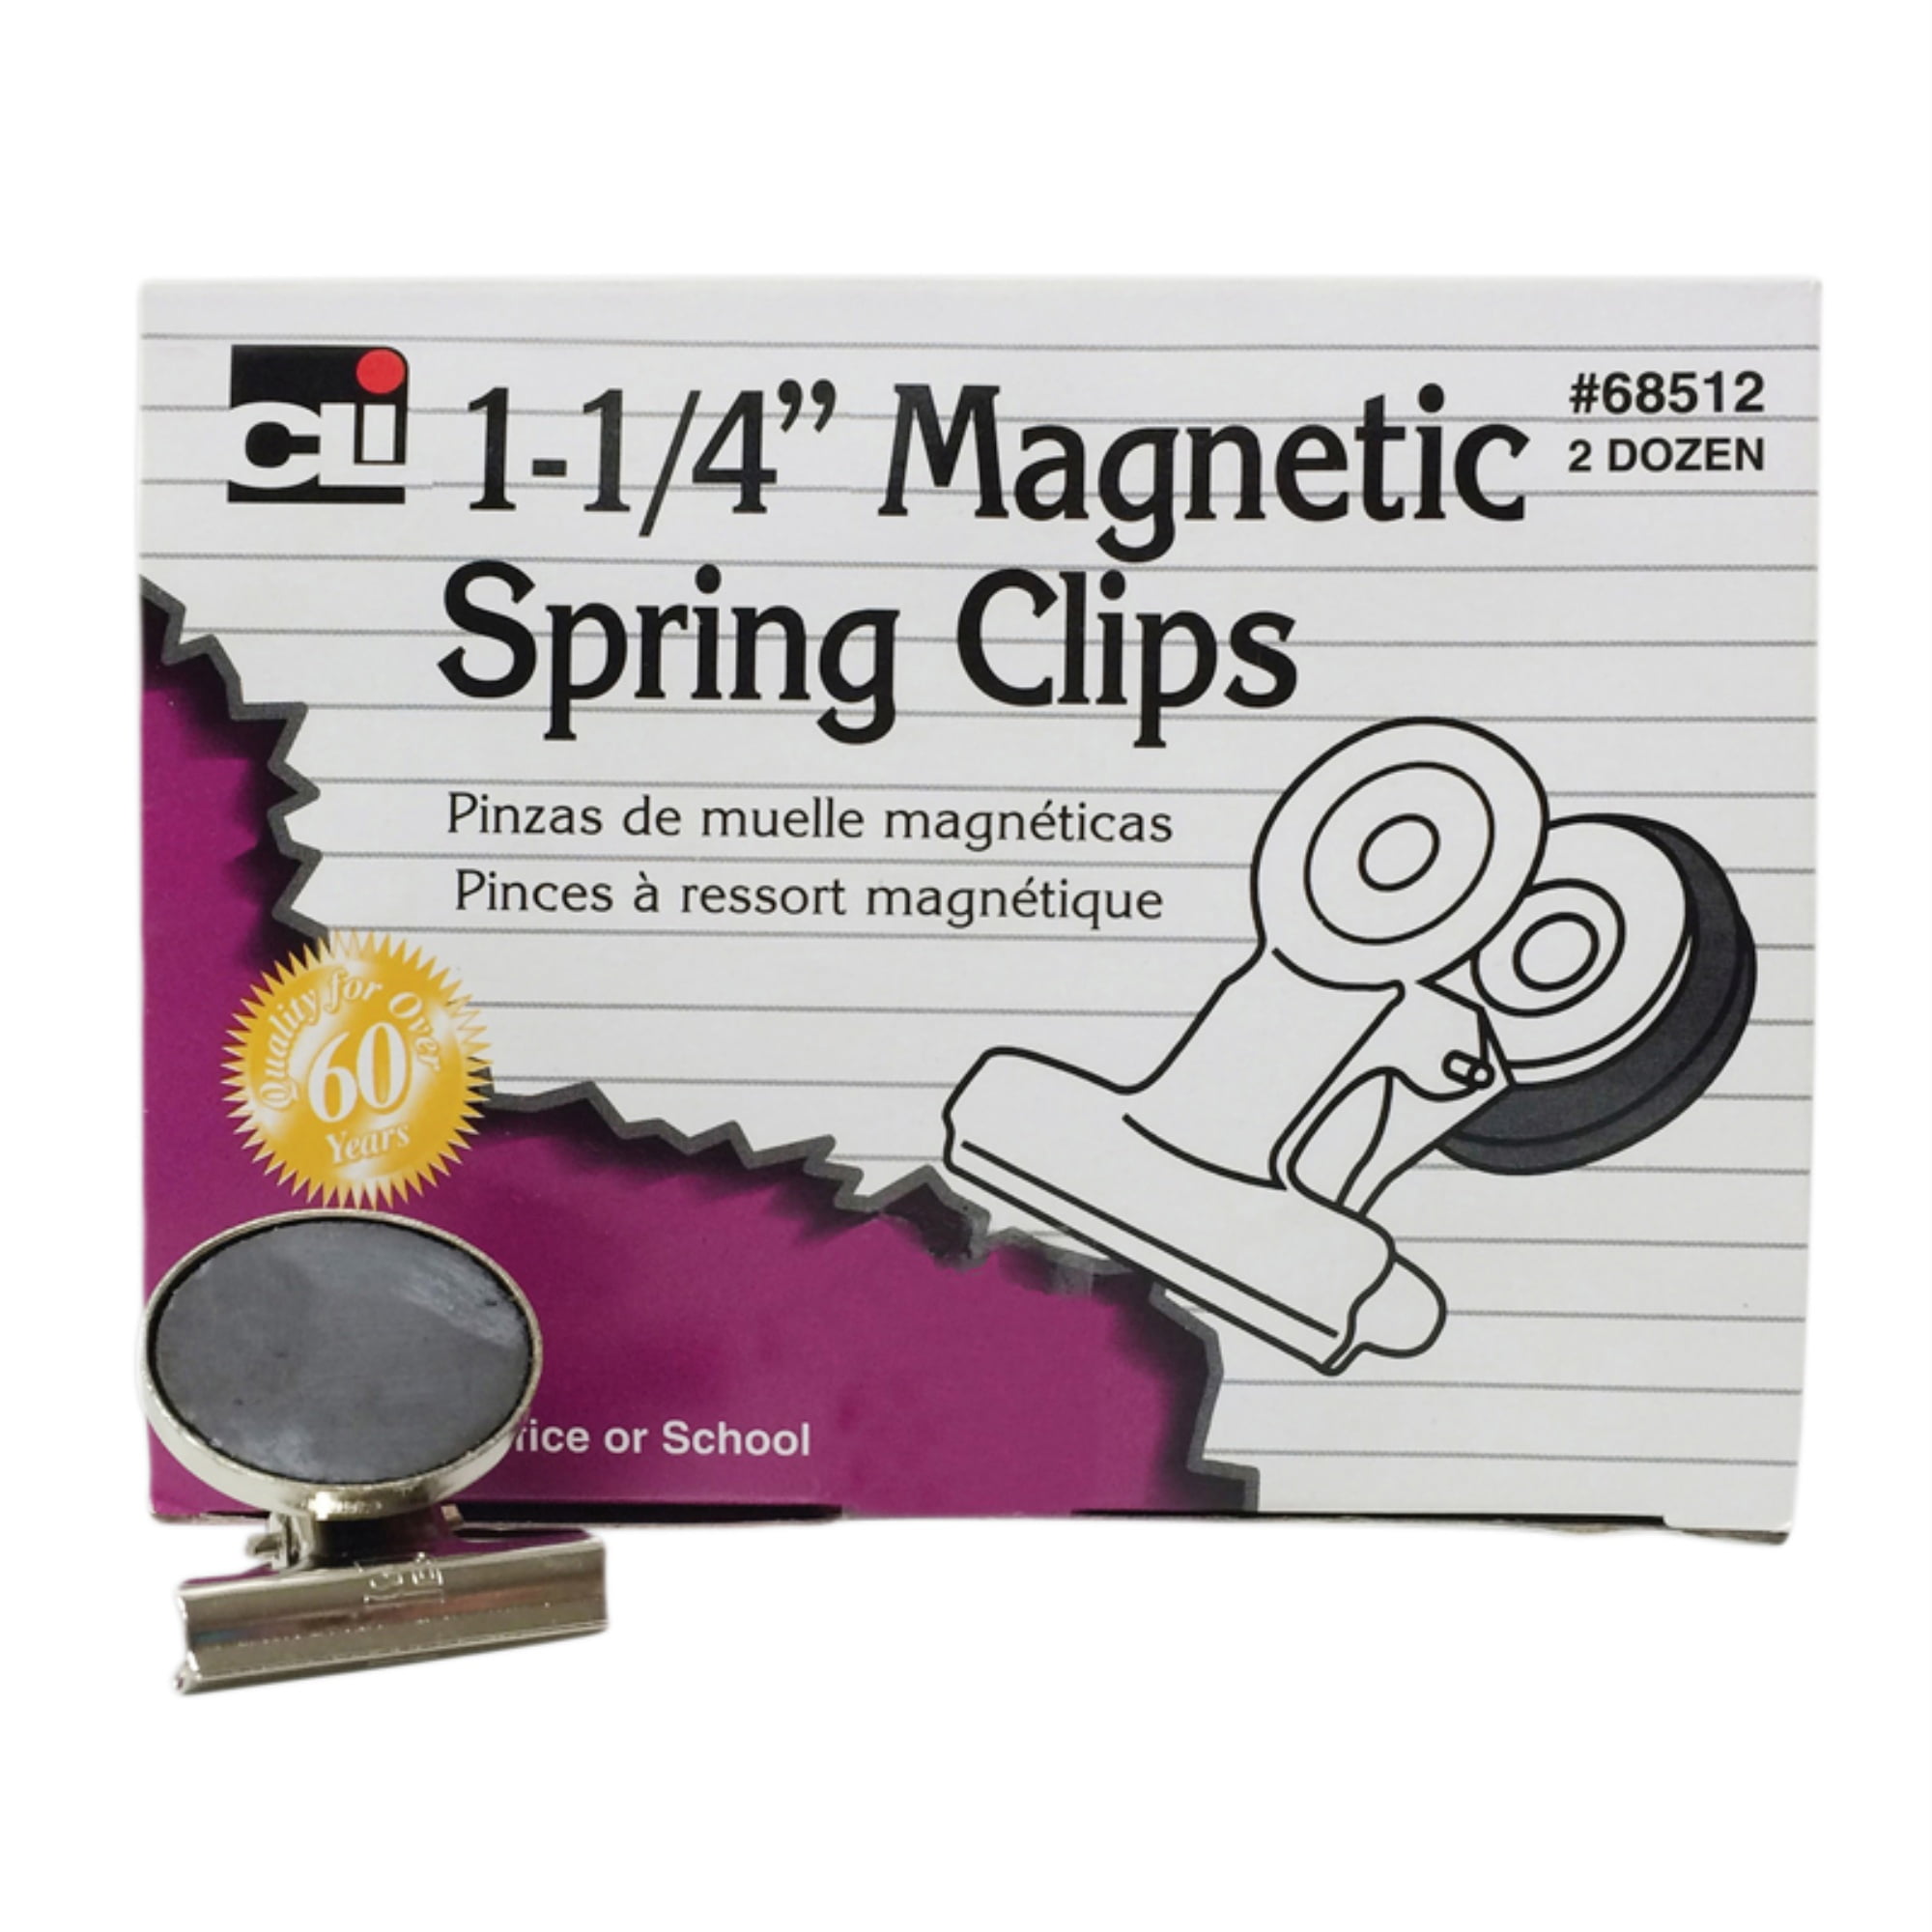 4 PC METAL Strong Magnetic Spring Clips Clamp Set Brand New In Package Magnets 